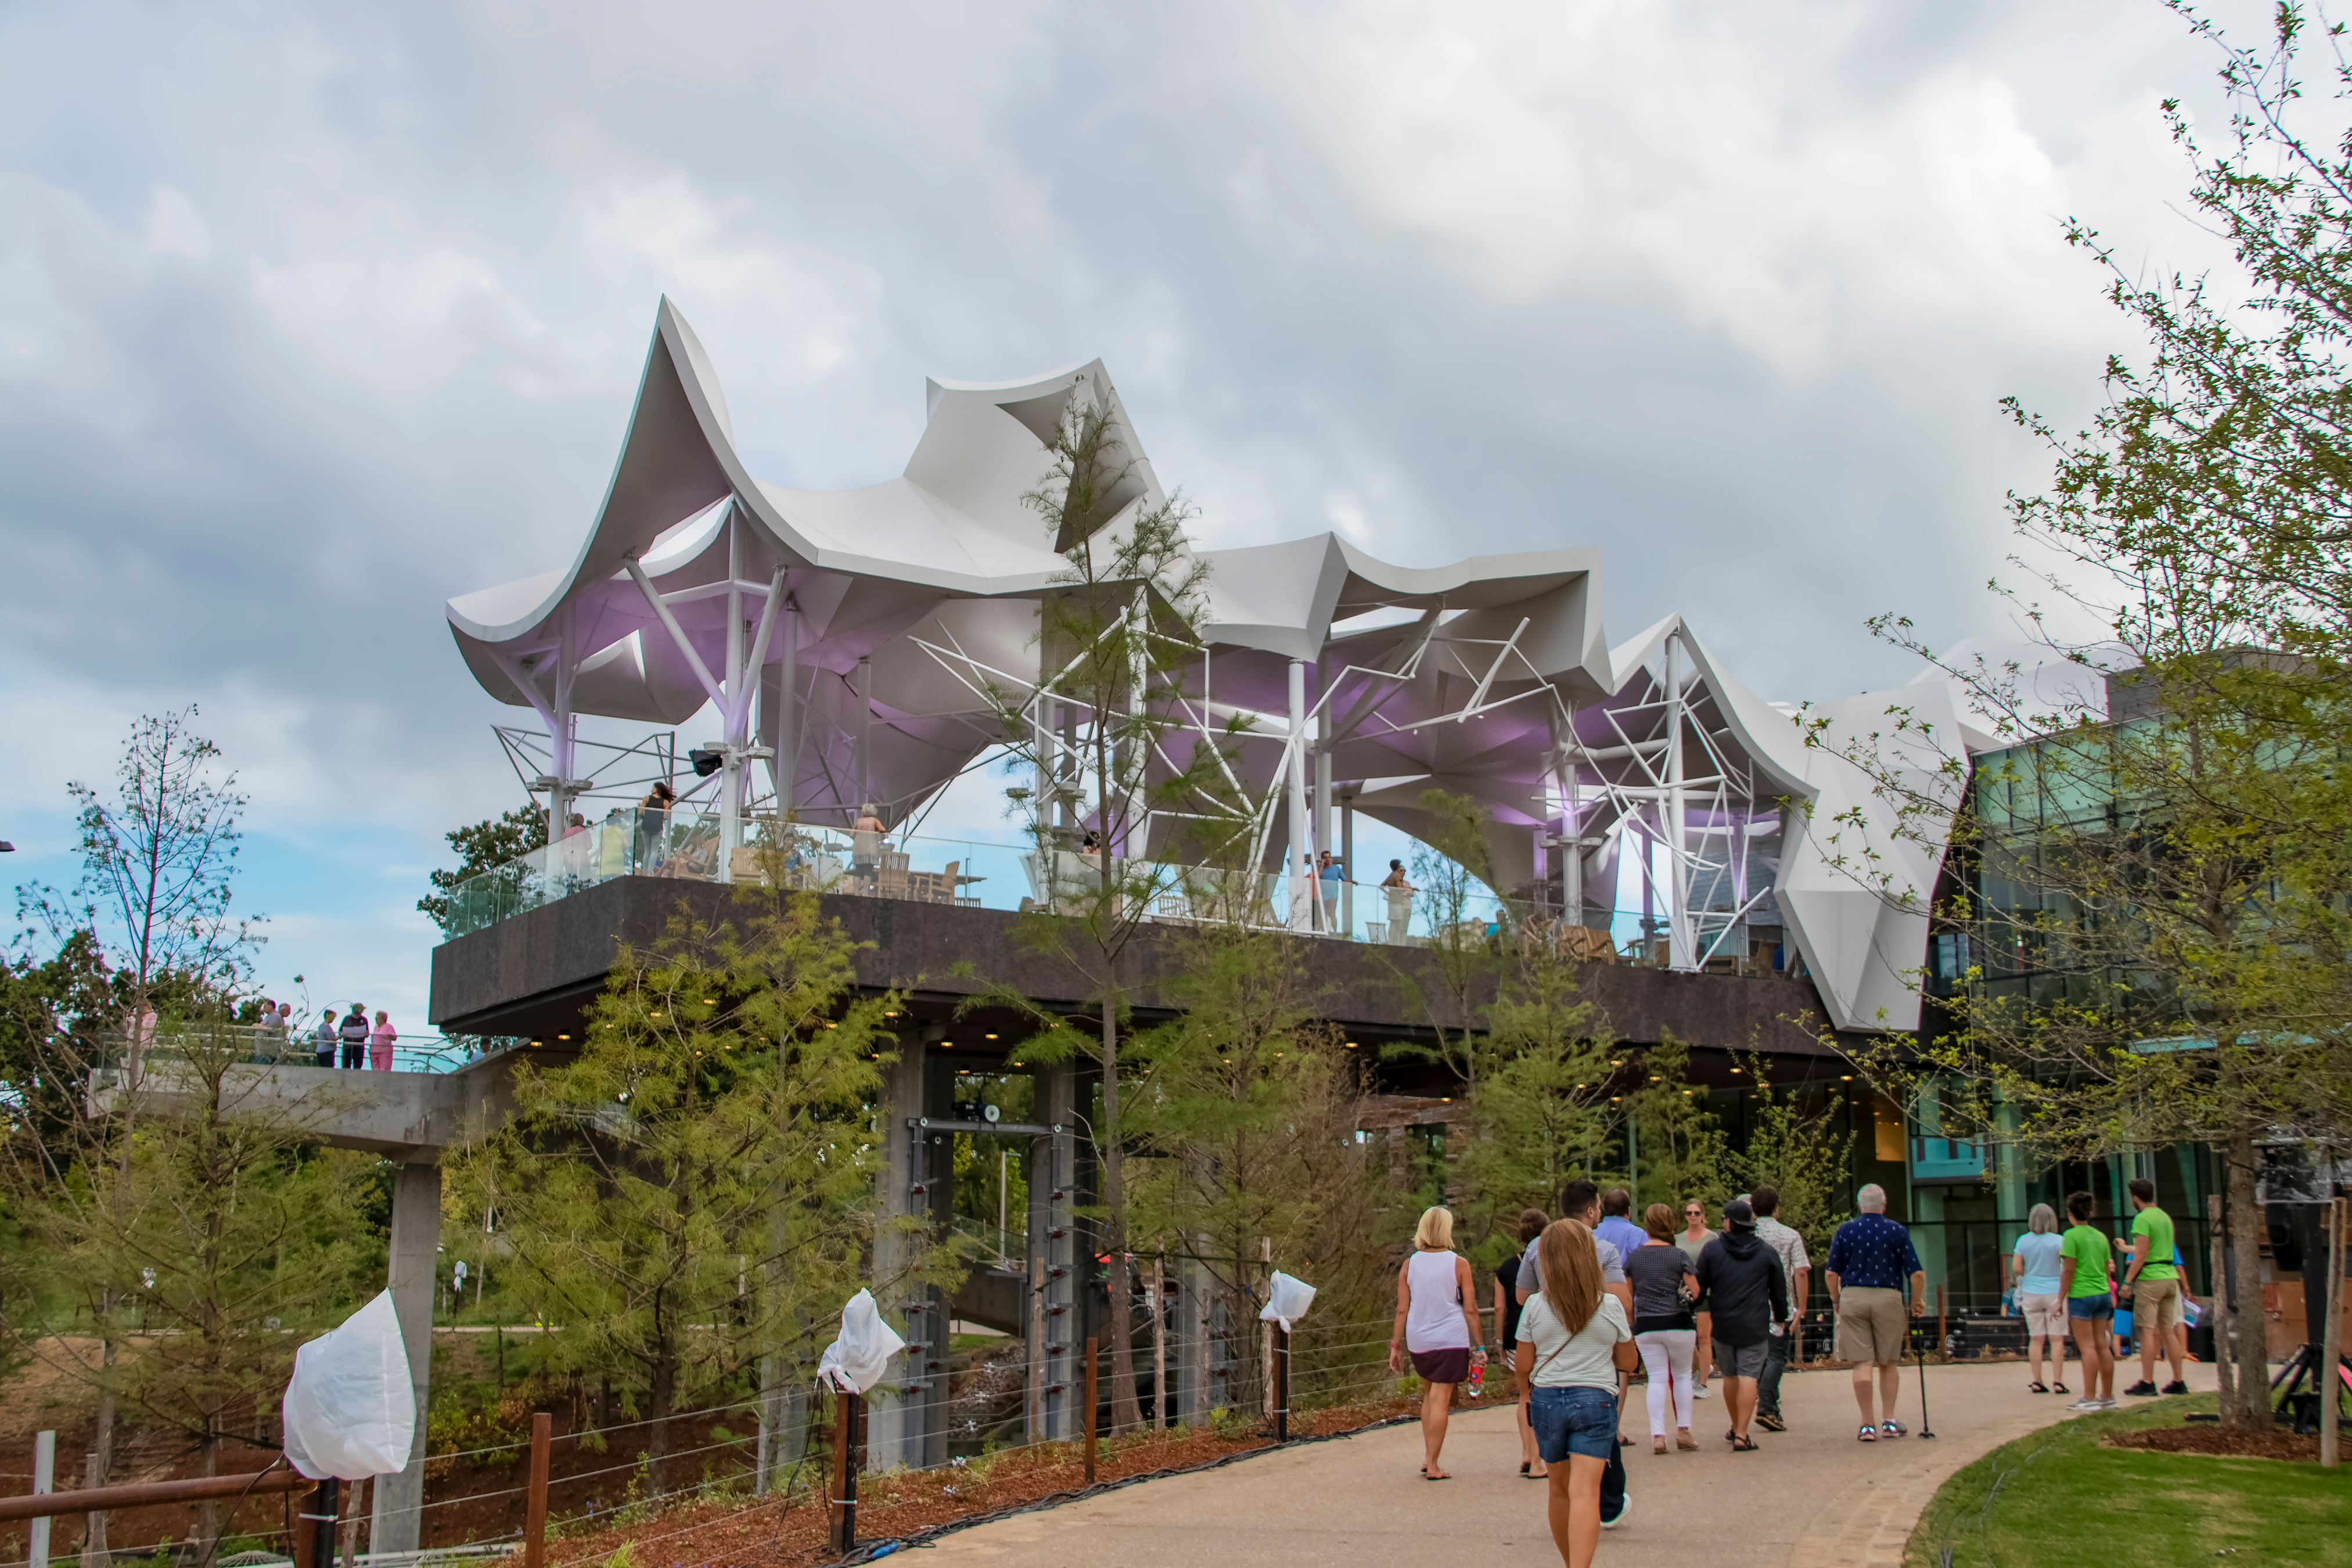 Tulsa USA 9-4-2018 Sneak Peak of the Gathering Place - Unique community riverfront park - People up on the Boathouse deck and other people walking toward it - Photo by Shutterstock